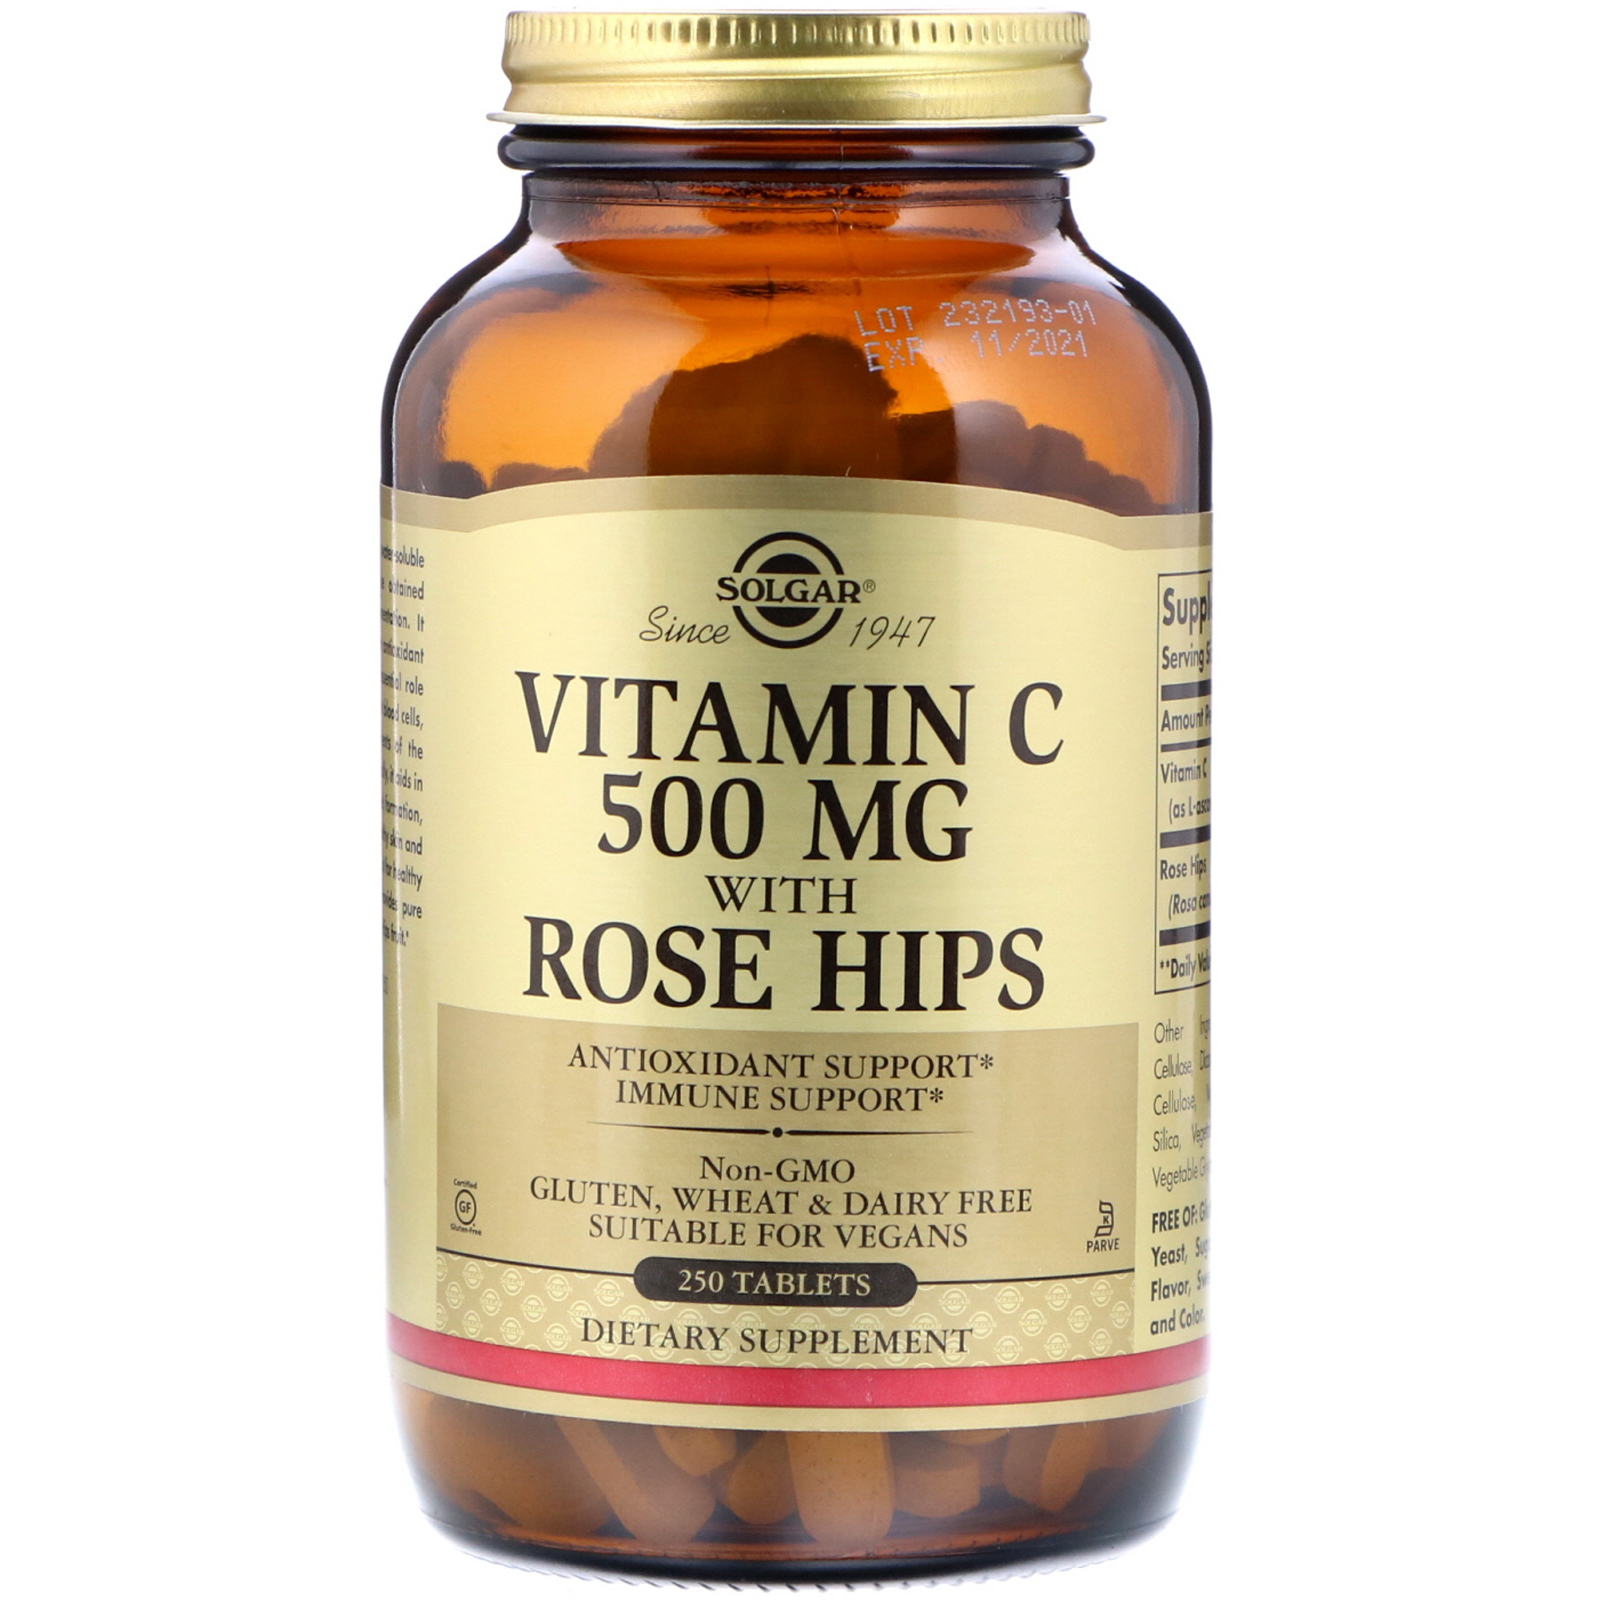 why vitamin c with rose hips